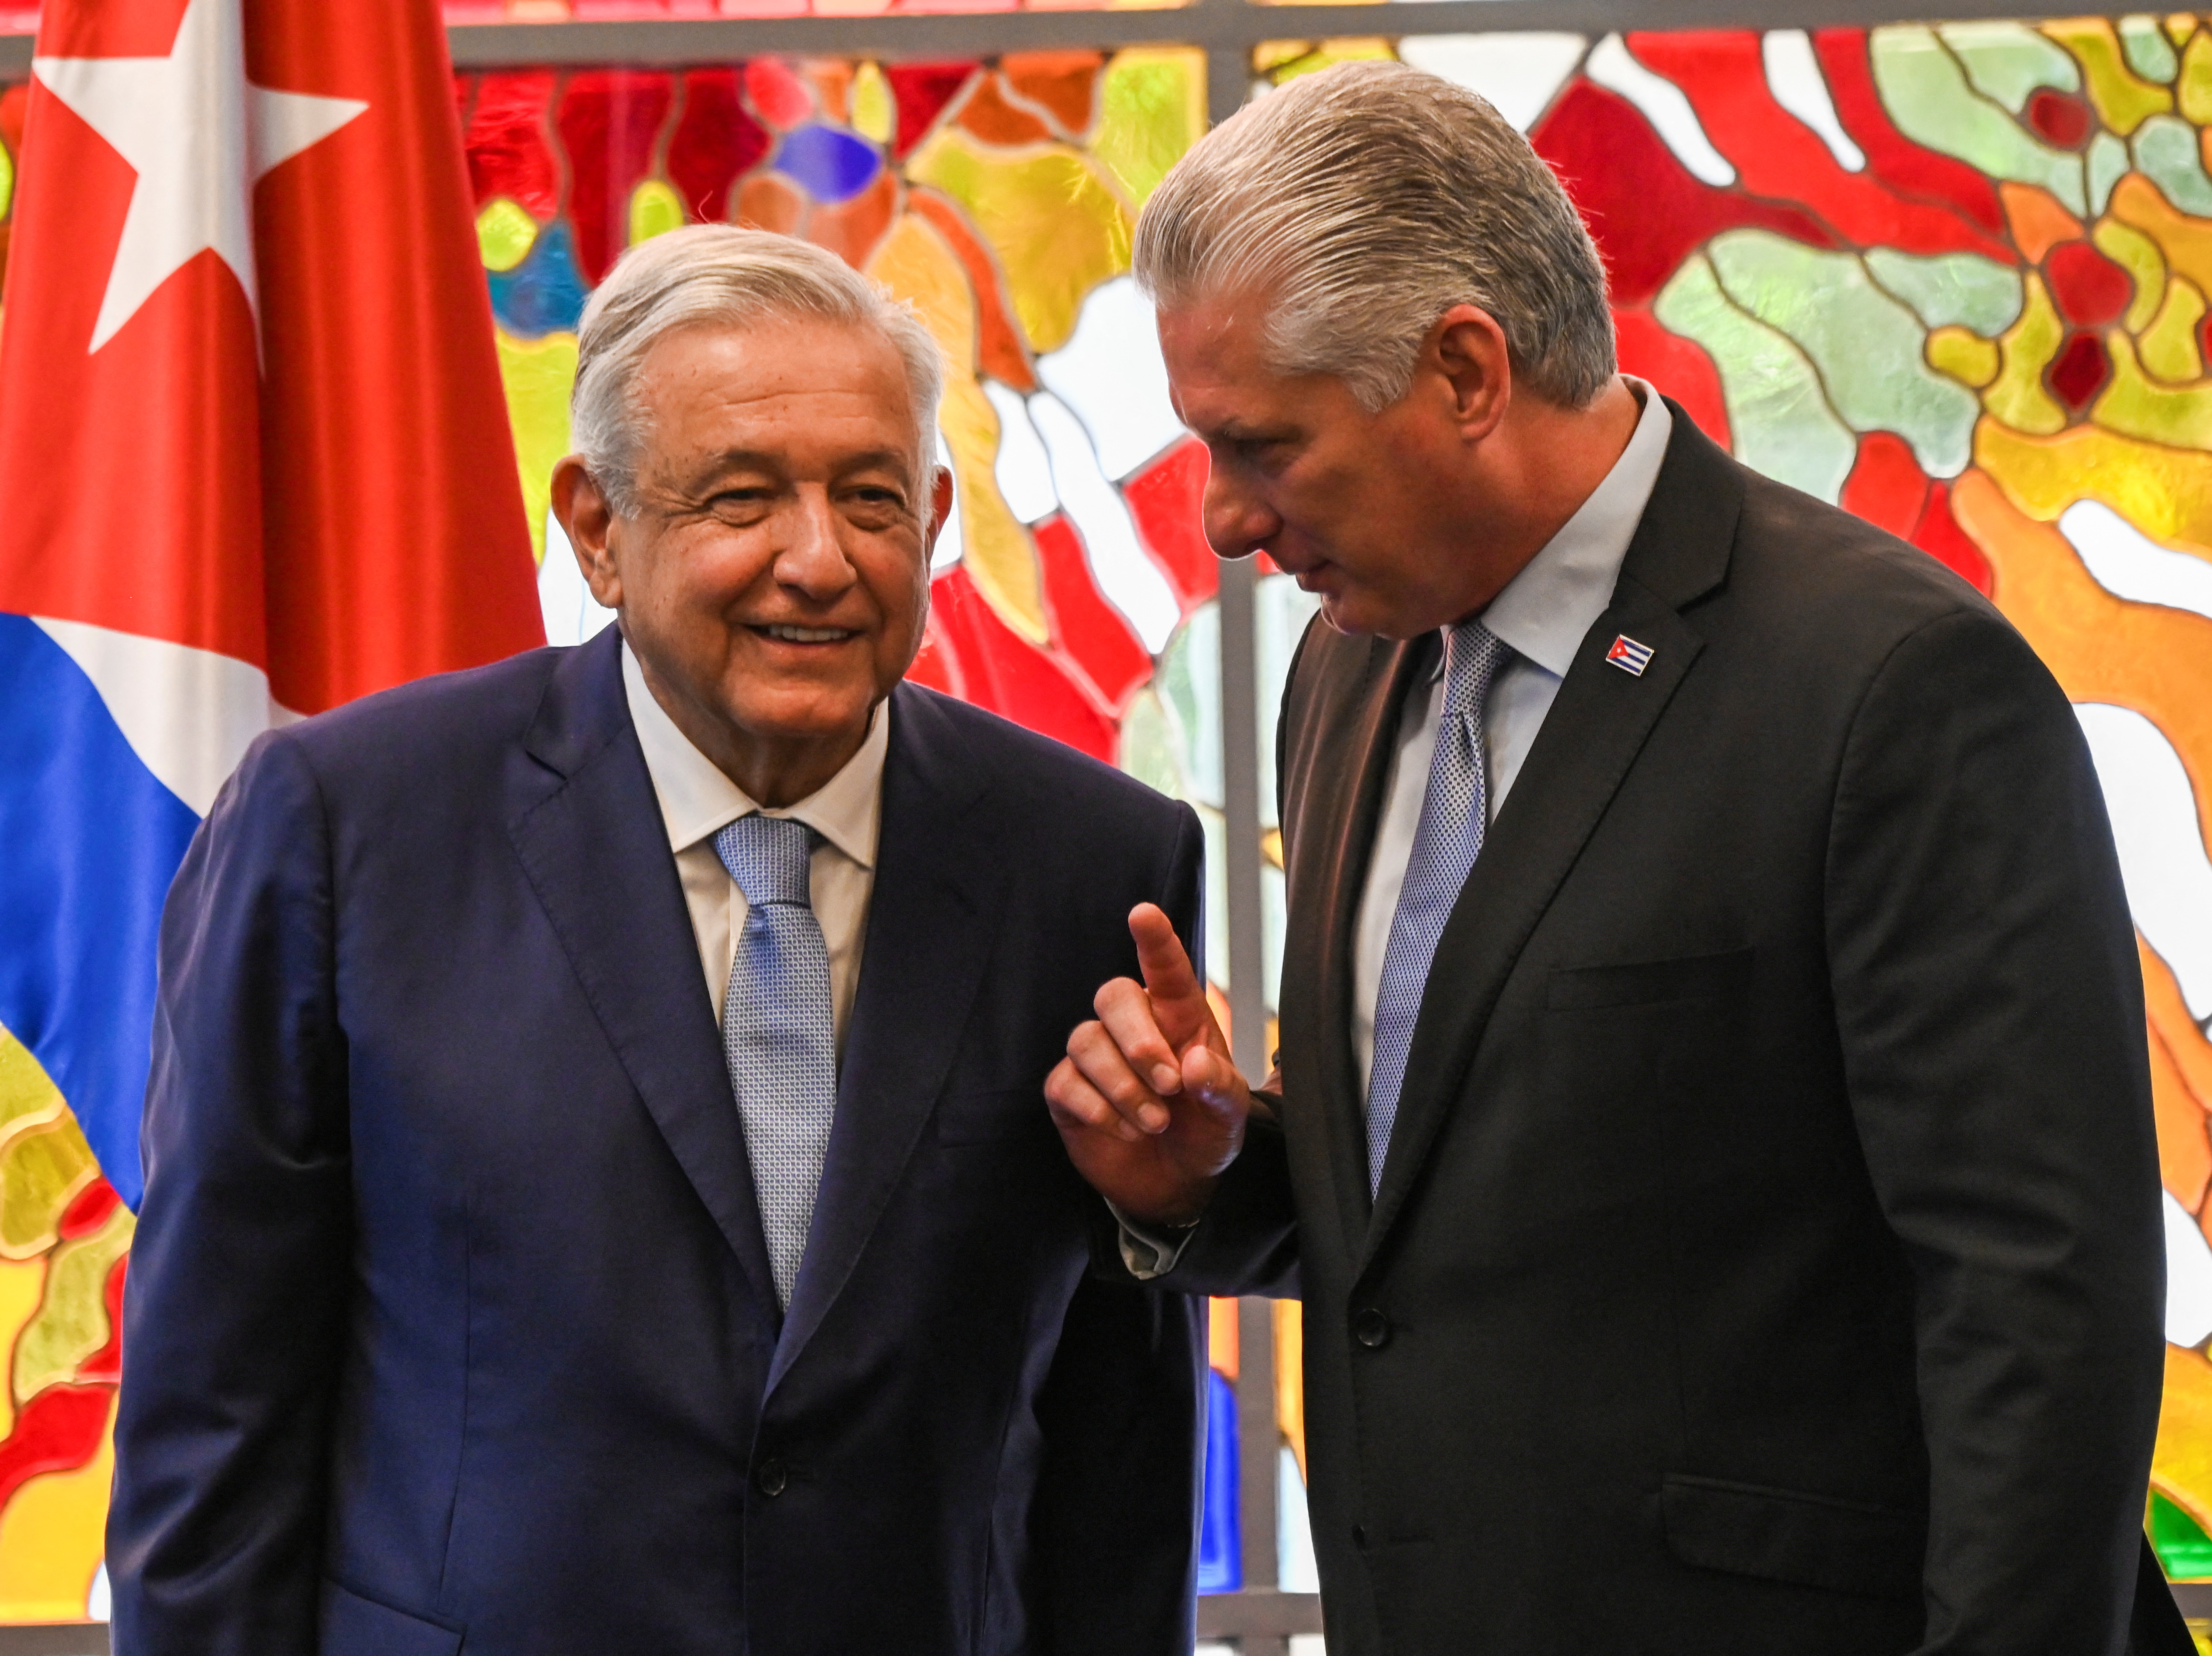 Mexico's President Andres Manuel Lopez Obrador and Cuba's President Miguel Diaz-Canel chat at the Revolution Palace in Havana, Cuba, May 8, 2022. Yamil Lage/Pool via REUTERS